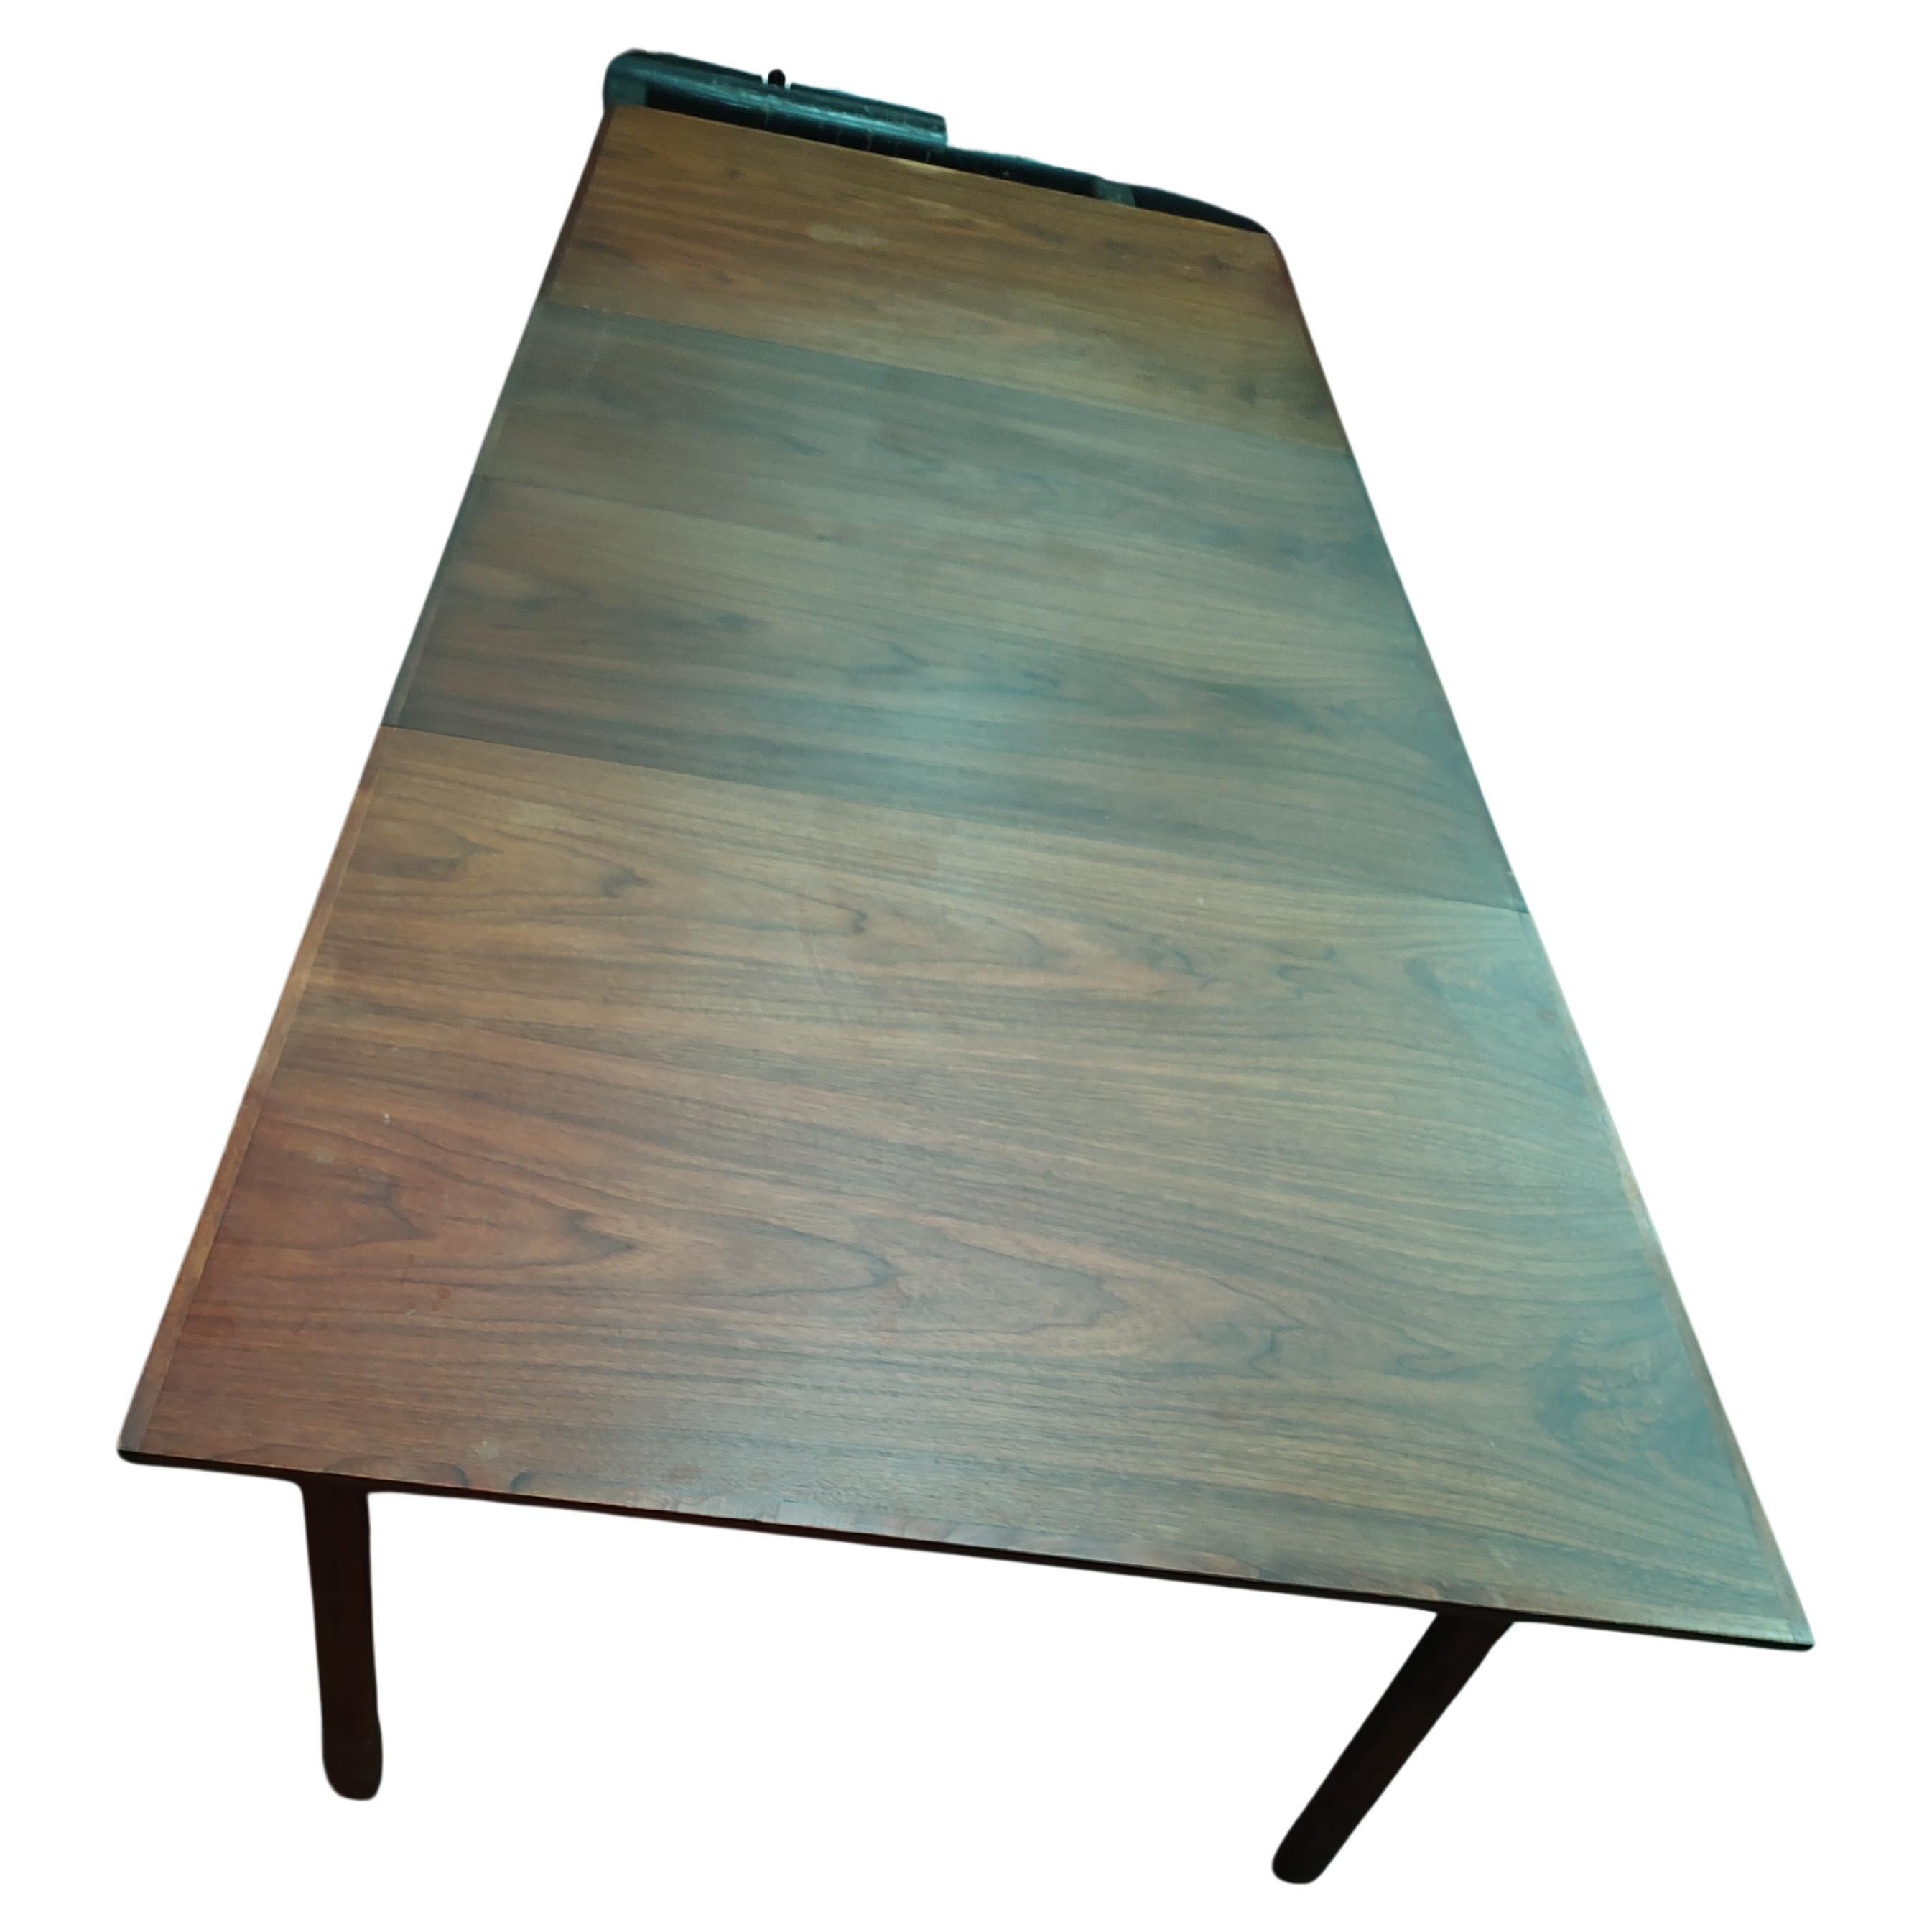 Hand-Crafted Mid Century Modern Walnut Extension Dining Room Table  For Sale